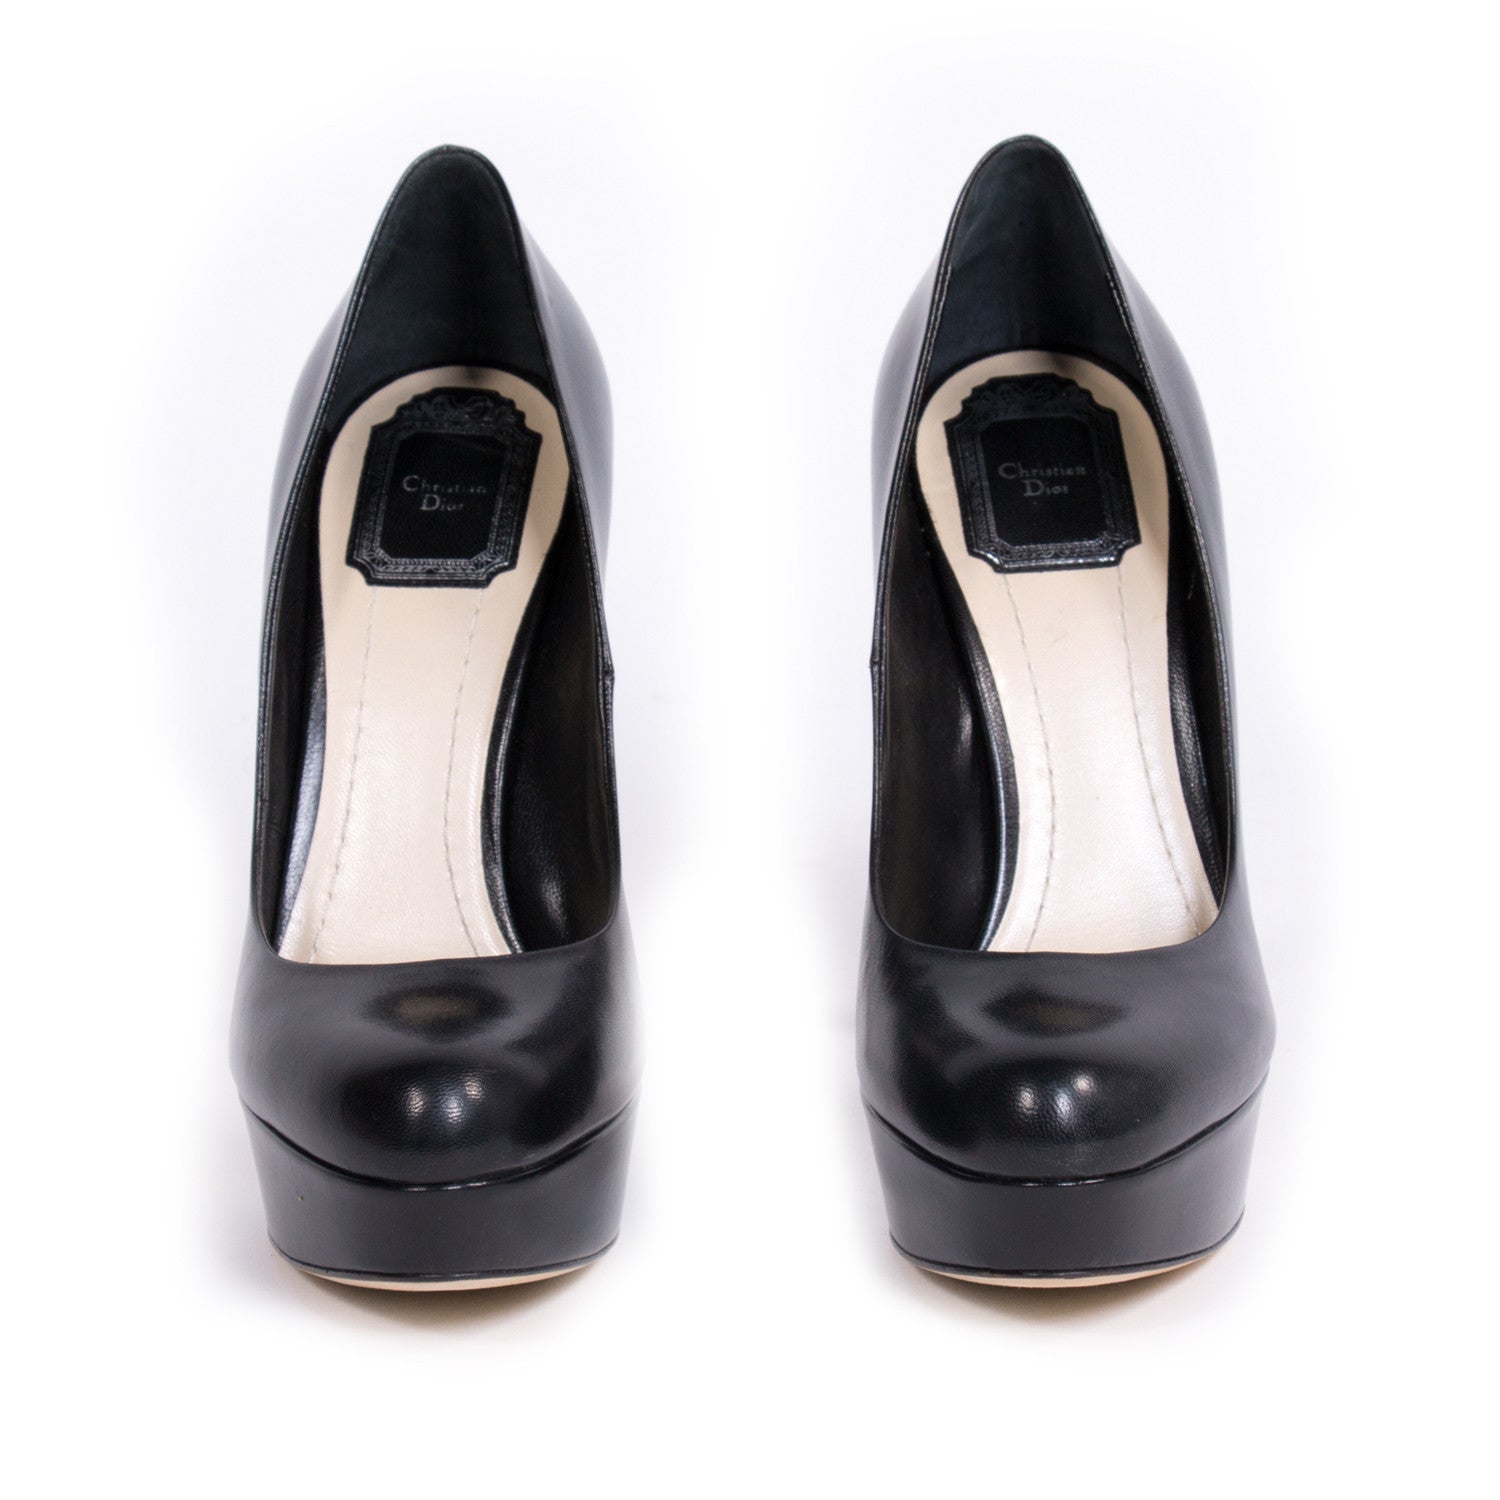 Shop authentic Christian Dior Leather Platform at revogue for just USD ...